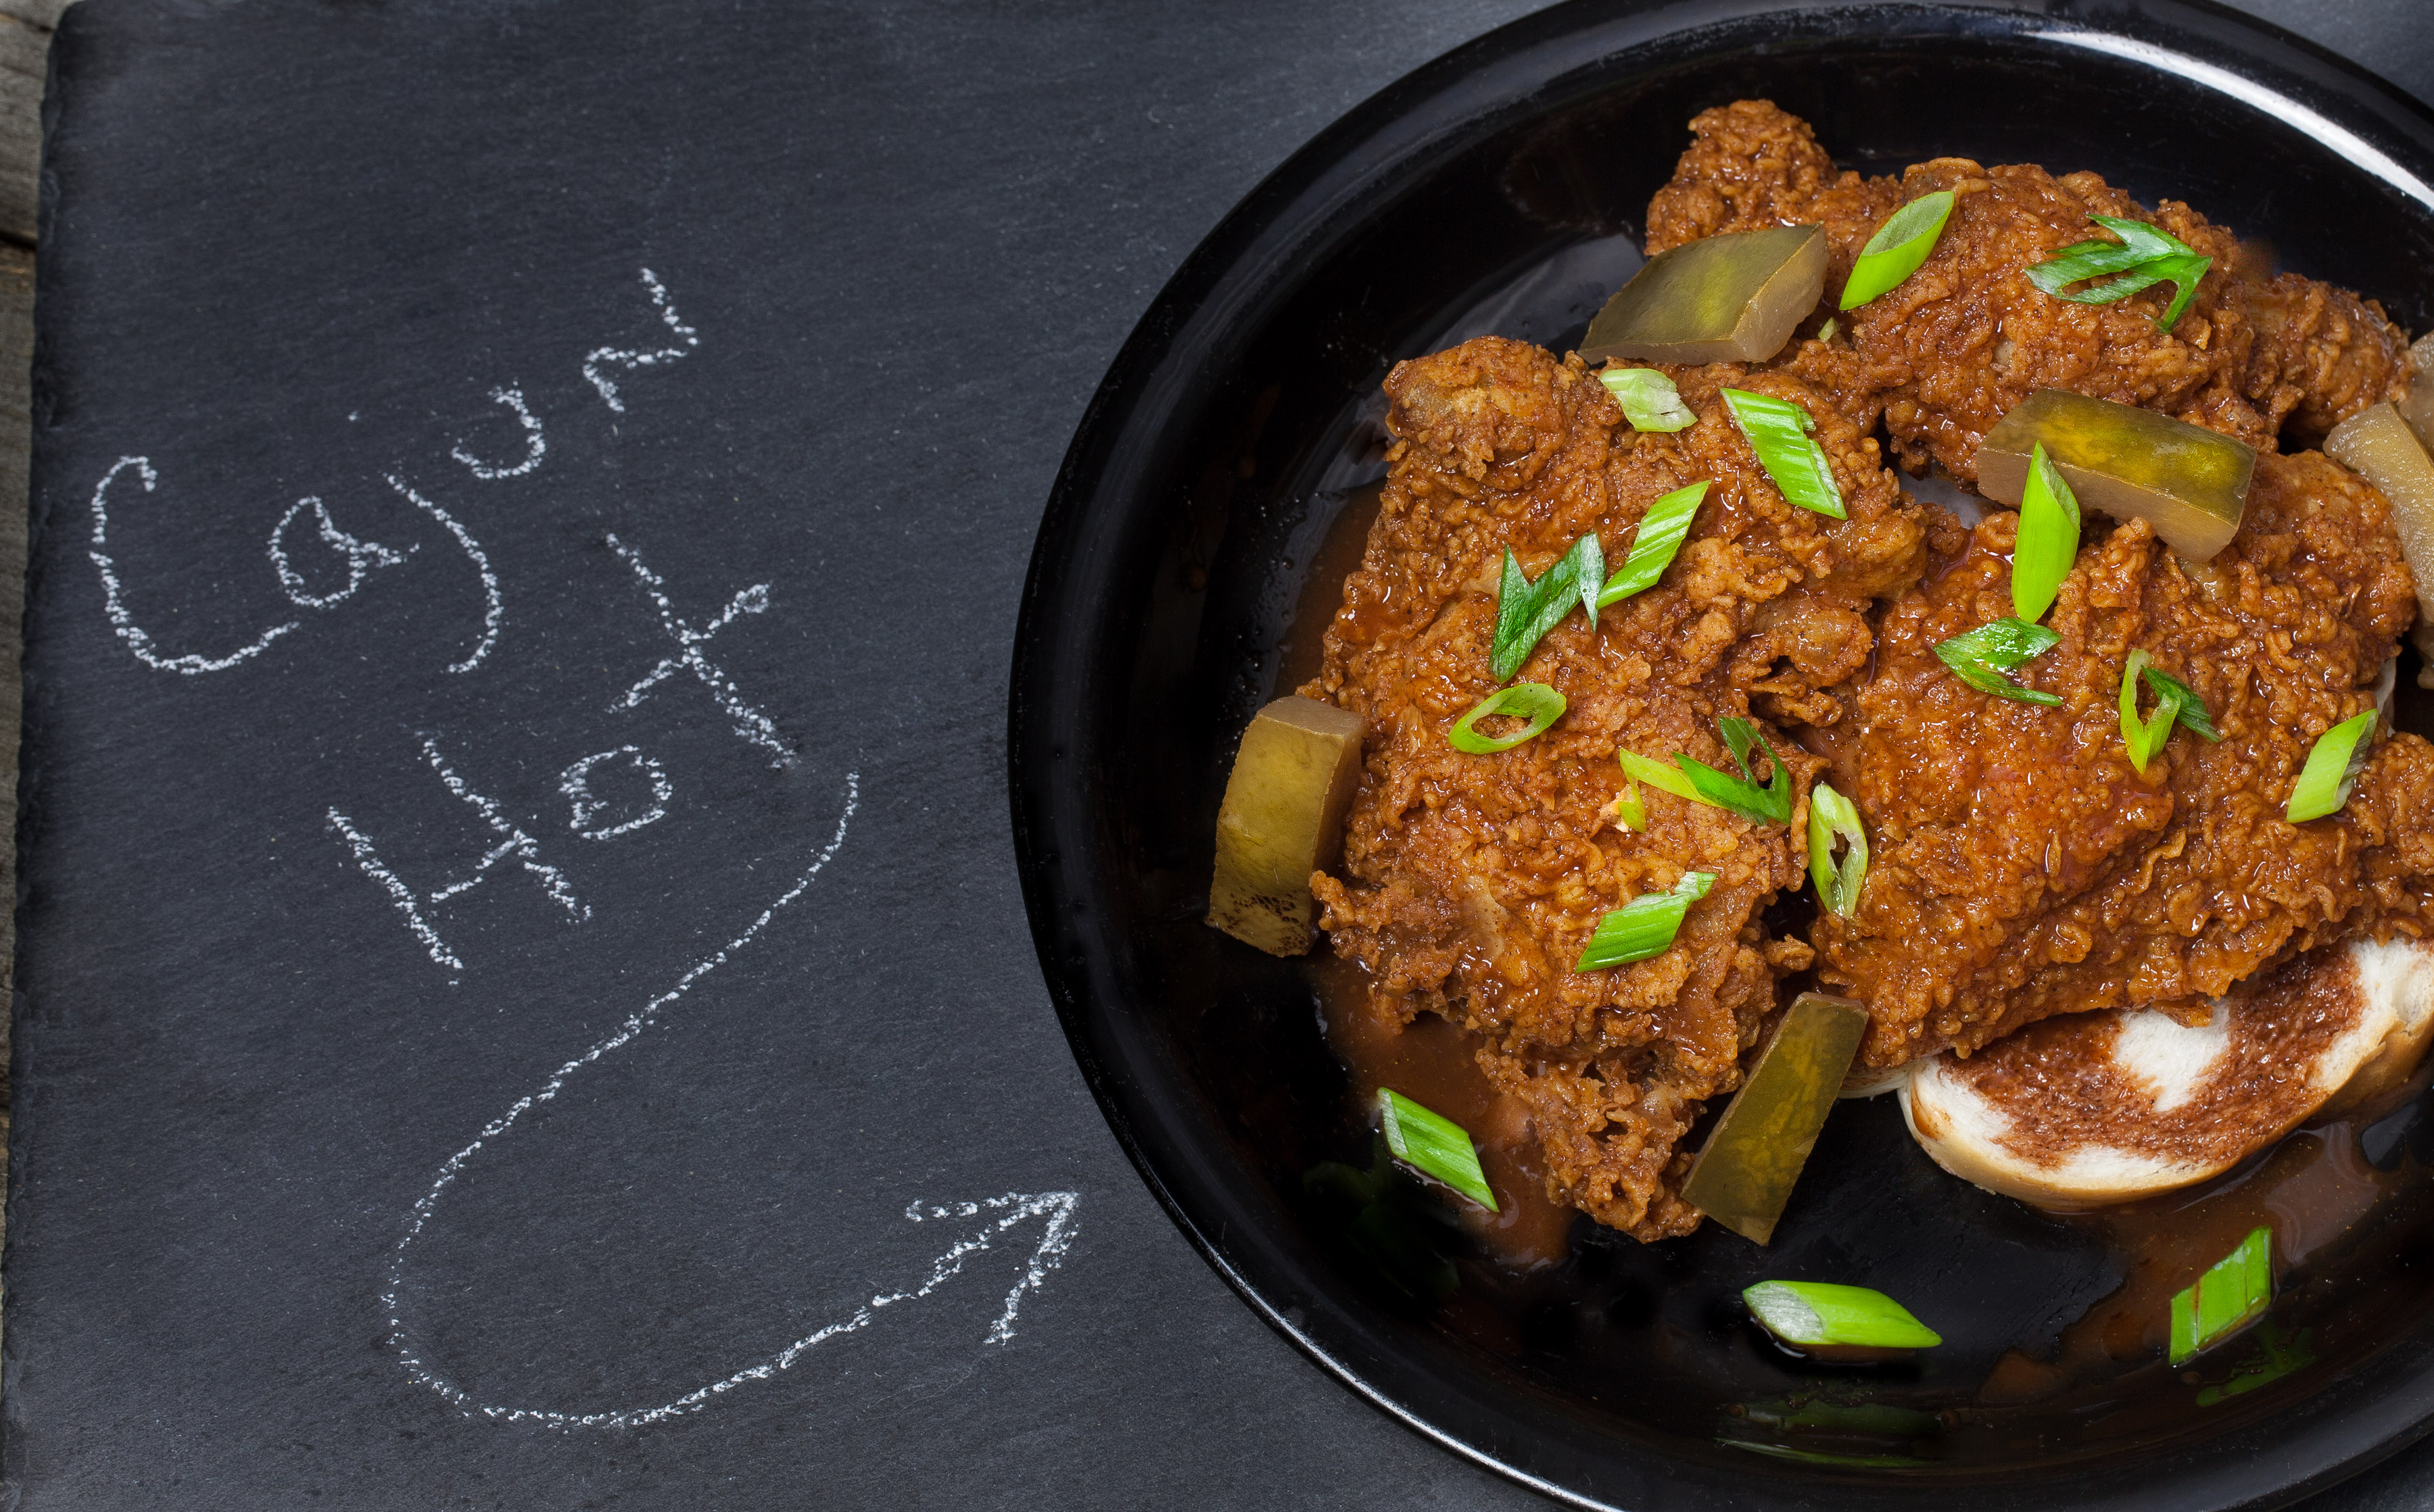 Cajun Hot Chicken is full of South Louisiana spice and flavor.